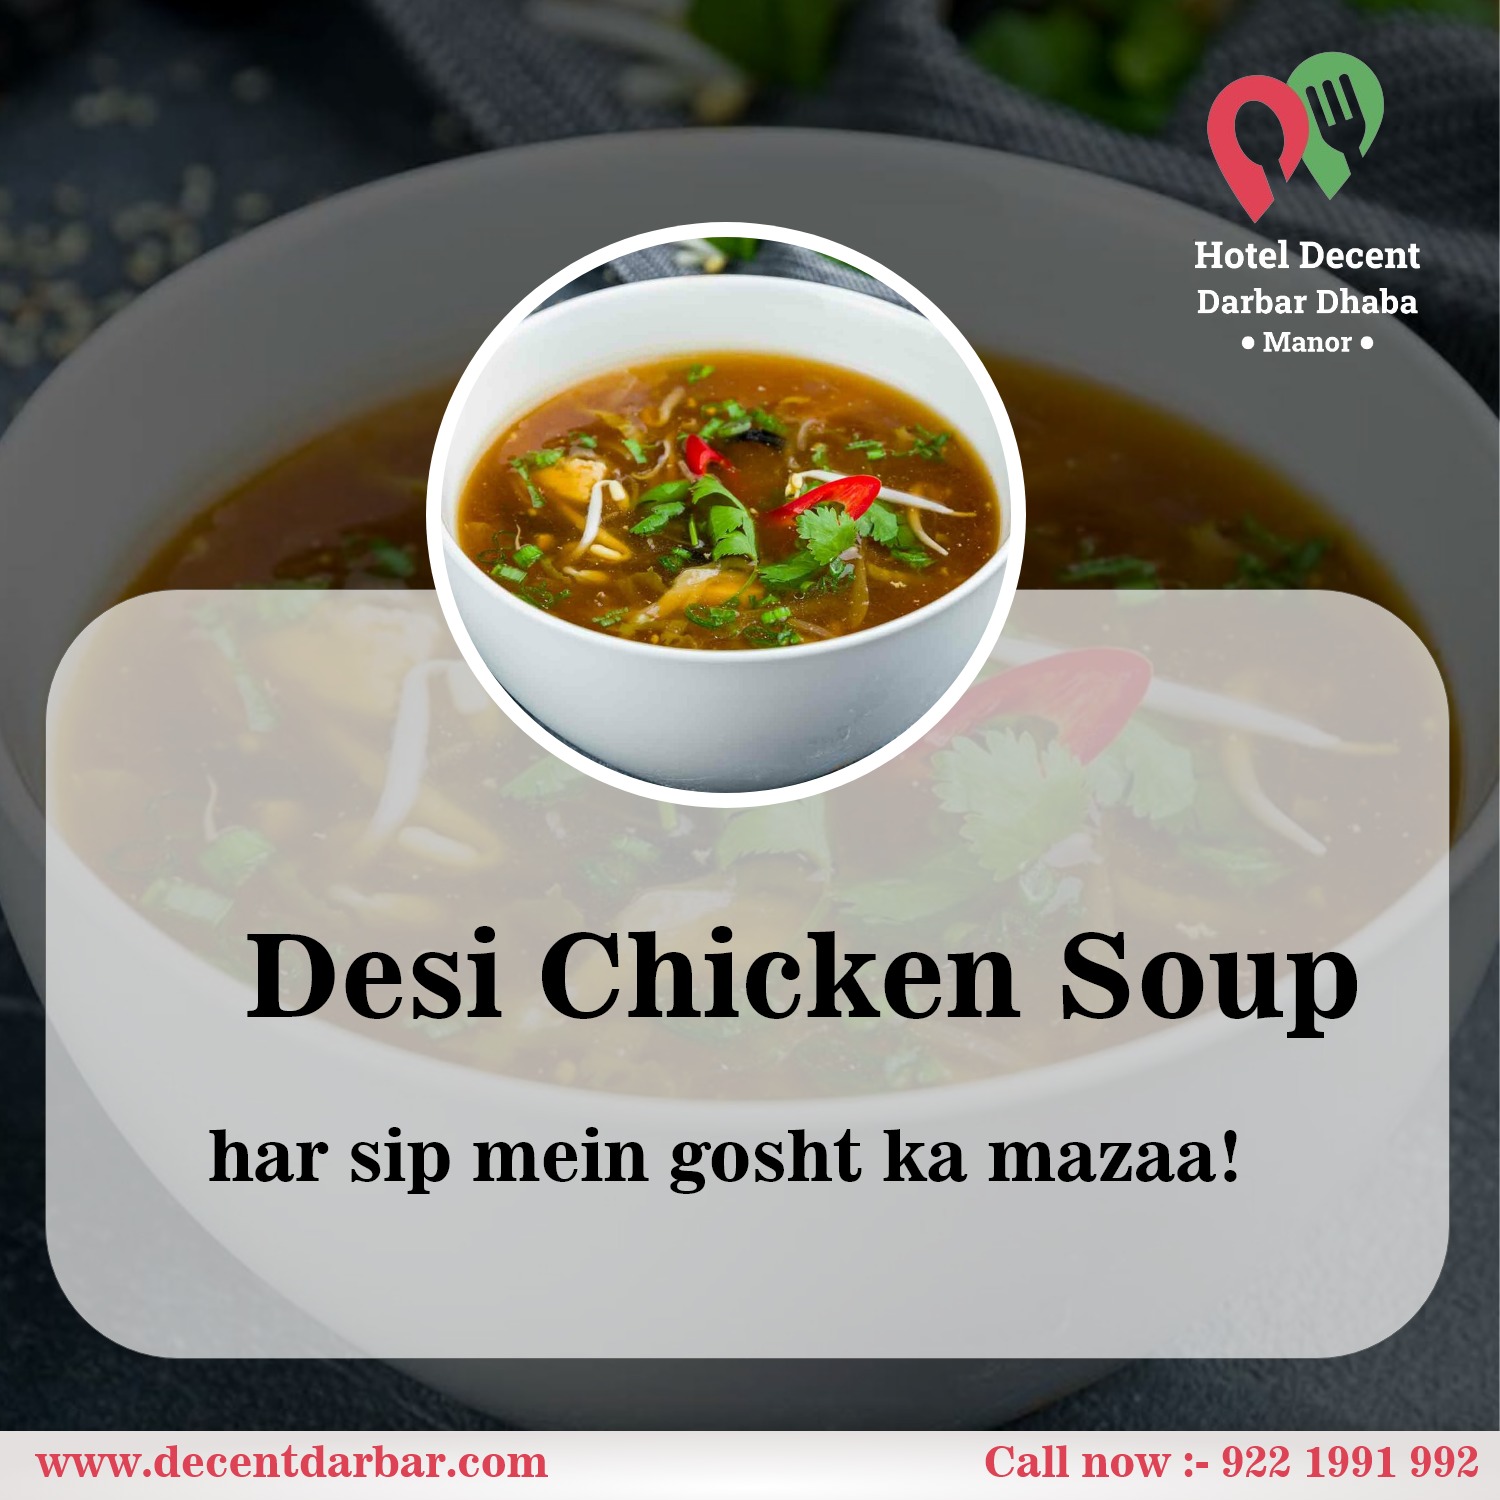 Warm Up with Our Desi Chicken Soup